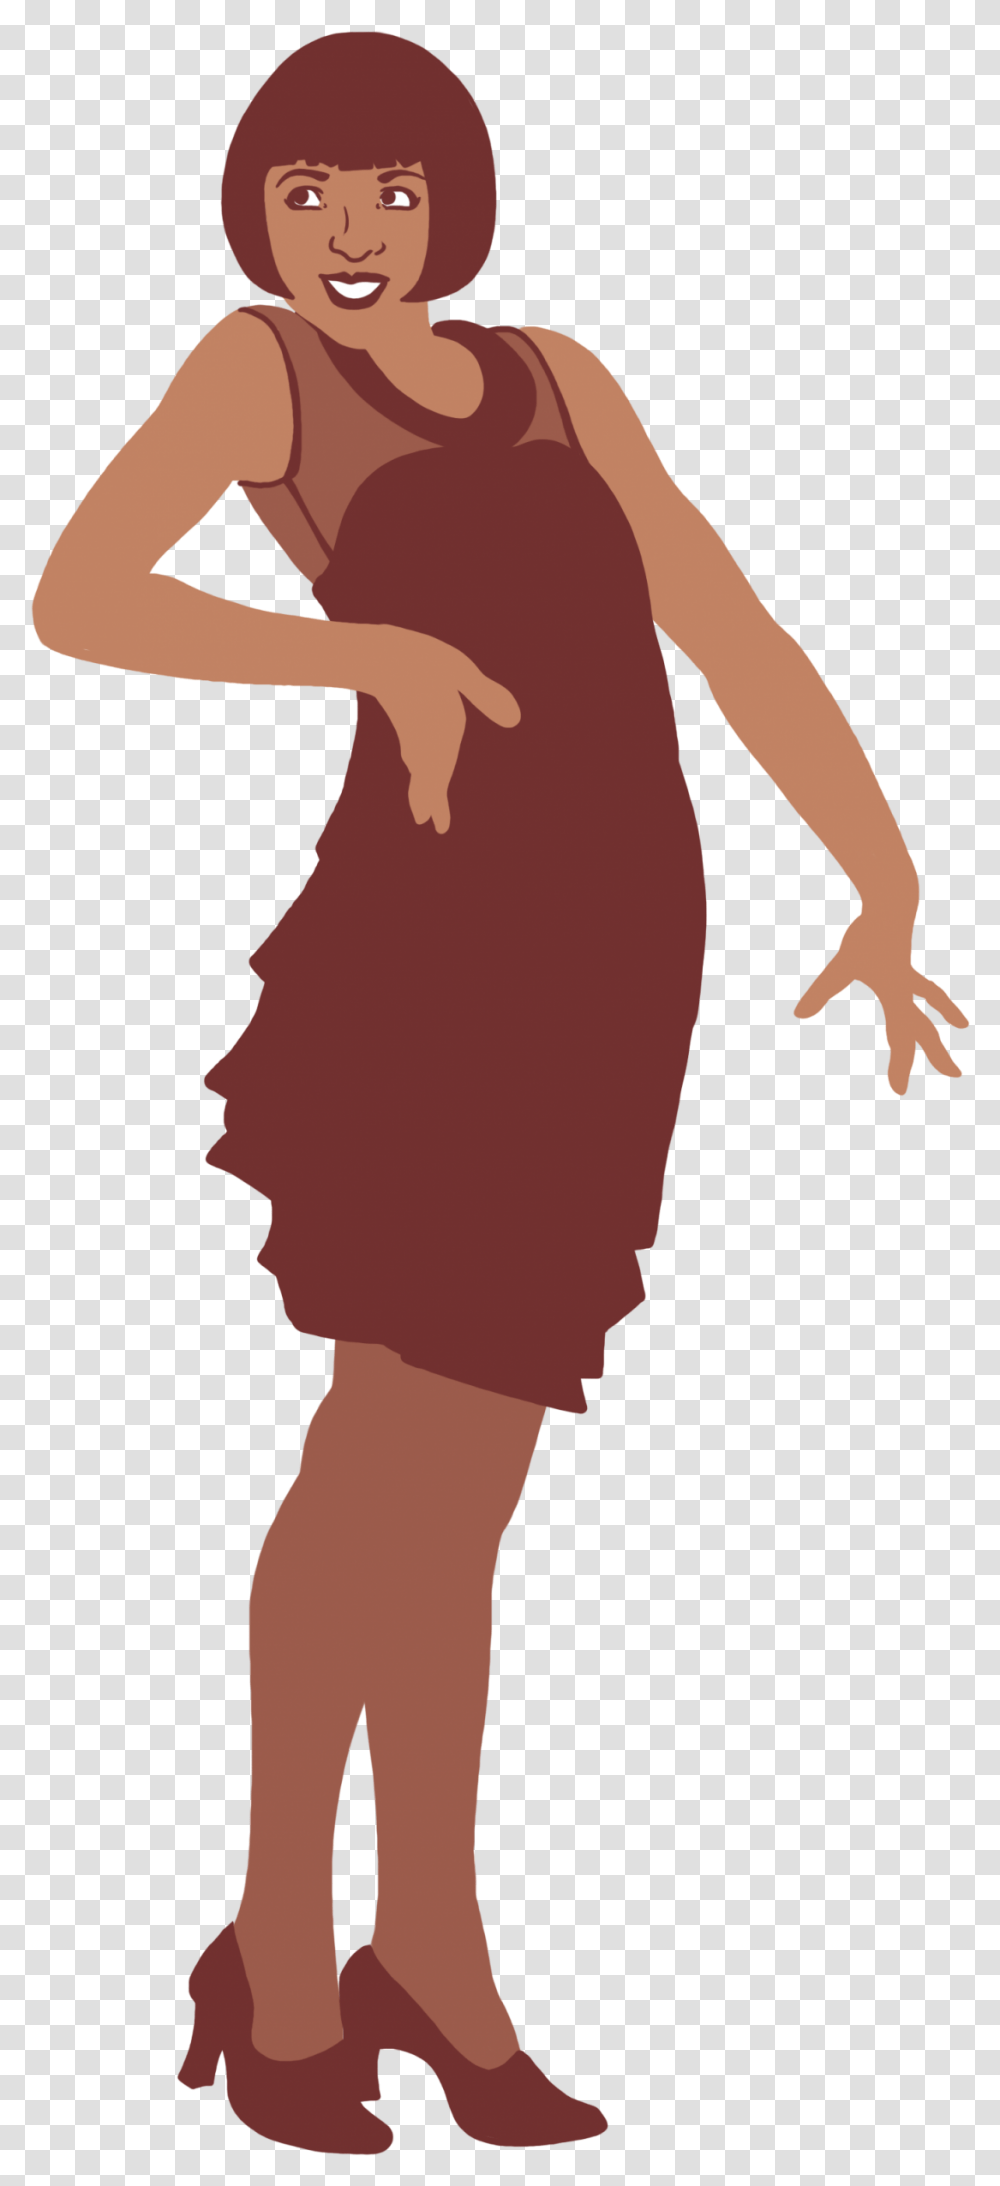 Things We're Bringing Back In The, Person, Sleeve, Dance Pose Transparent Png